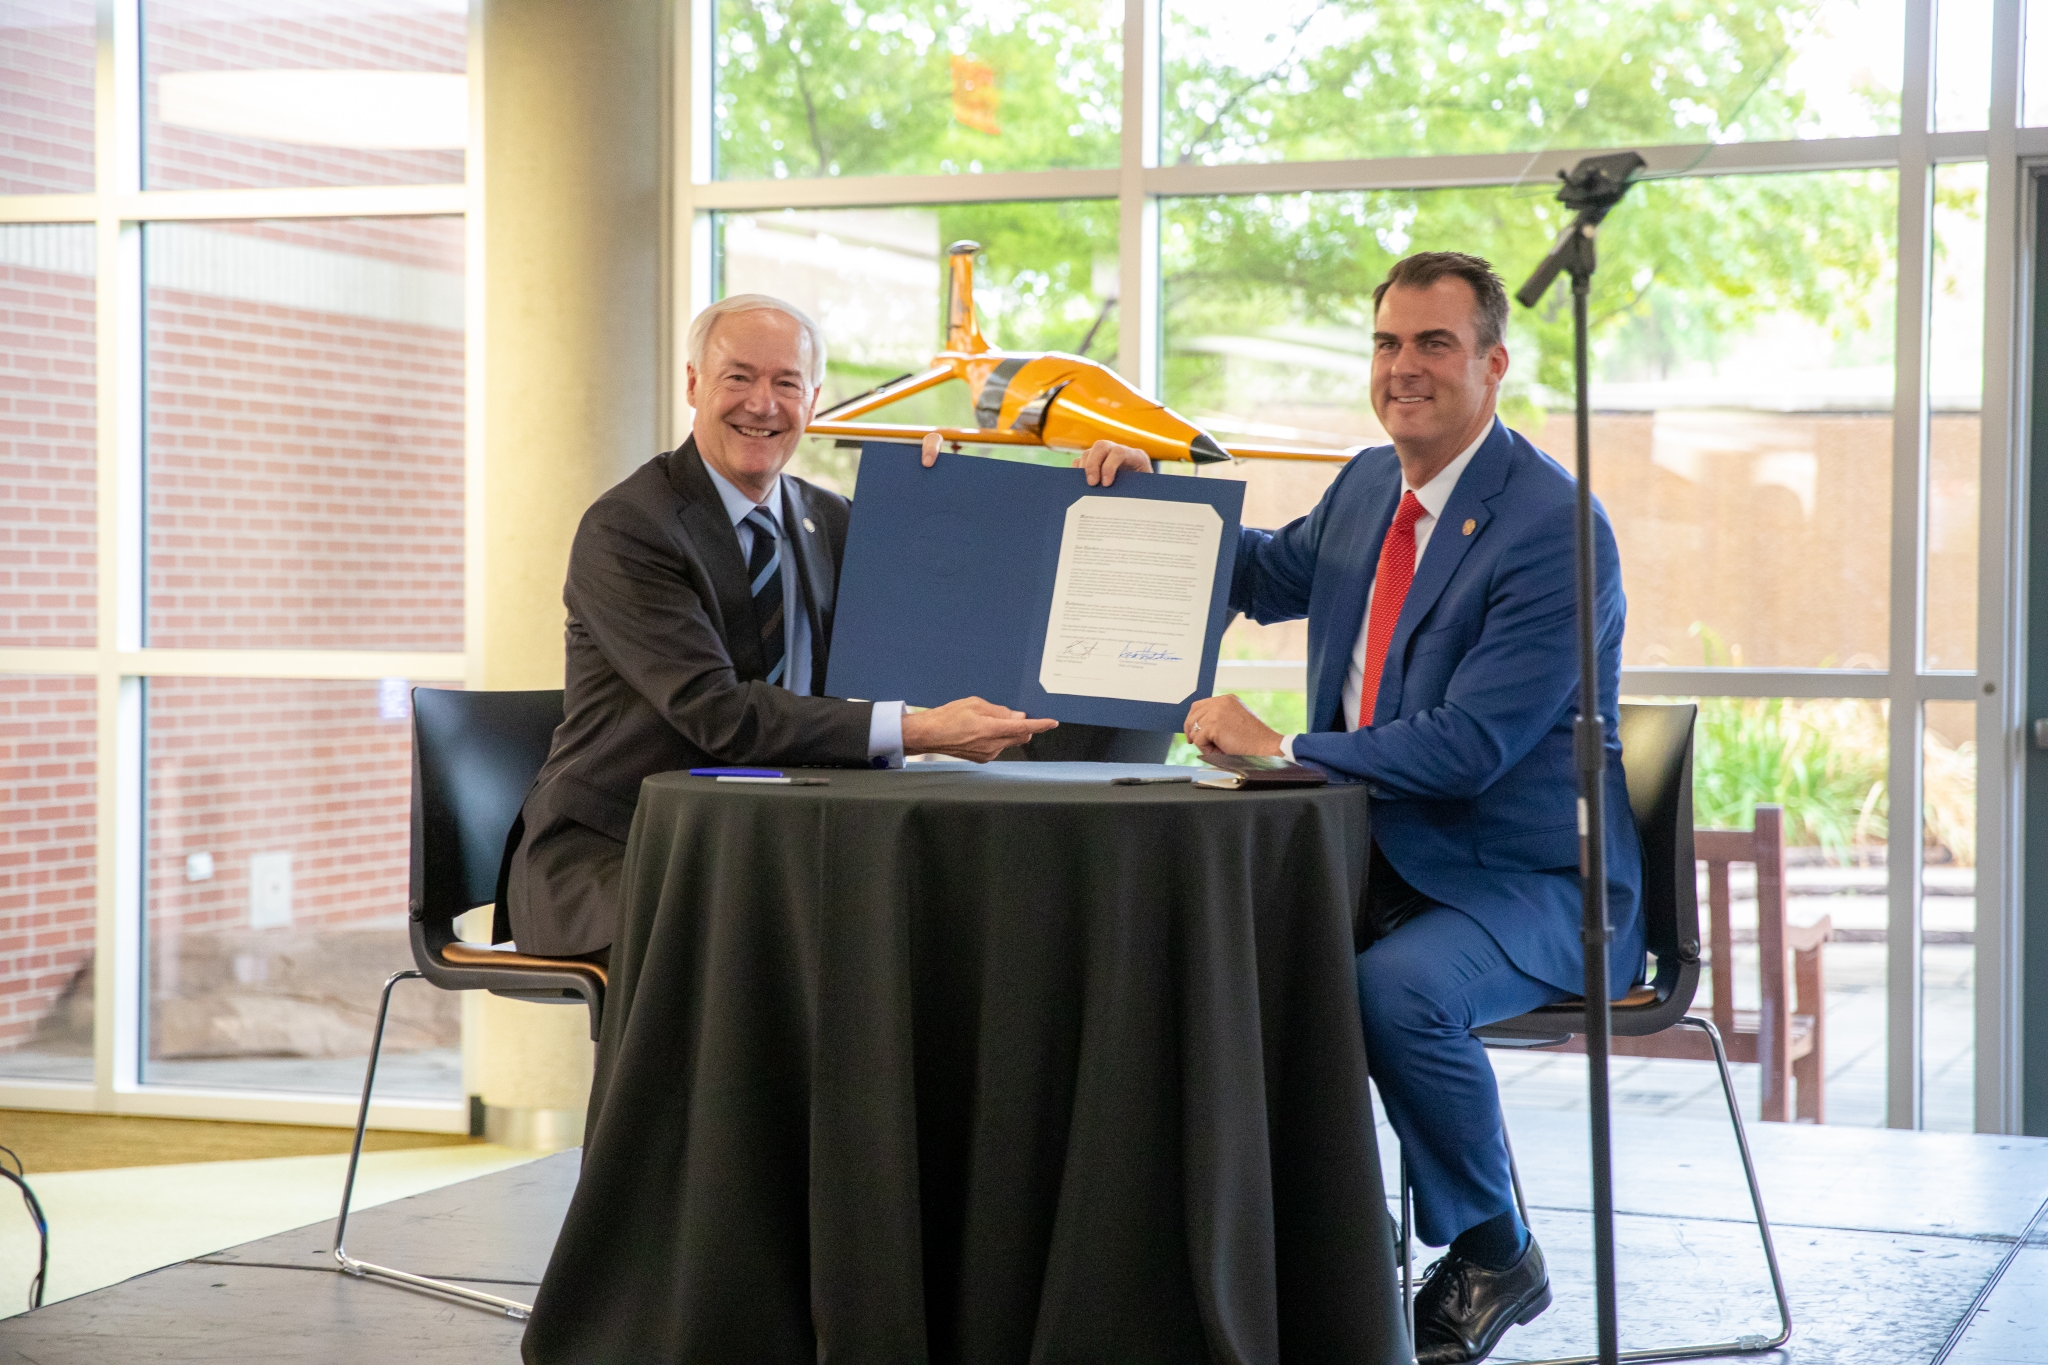 Oklahoma Governor Kevin Stitt, right, and Arkansas Governor Asa Hutchinson, left, announced plans in August 2022 to designate the Oklahoma-Arkansas region as a national hub for advanced mobility